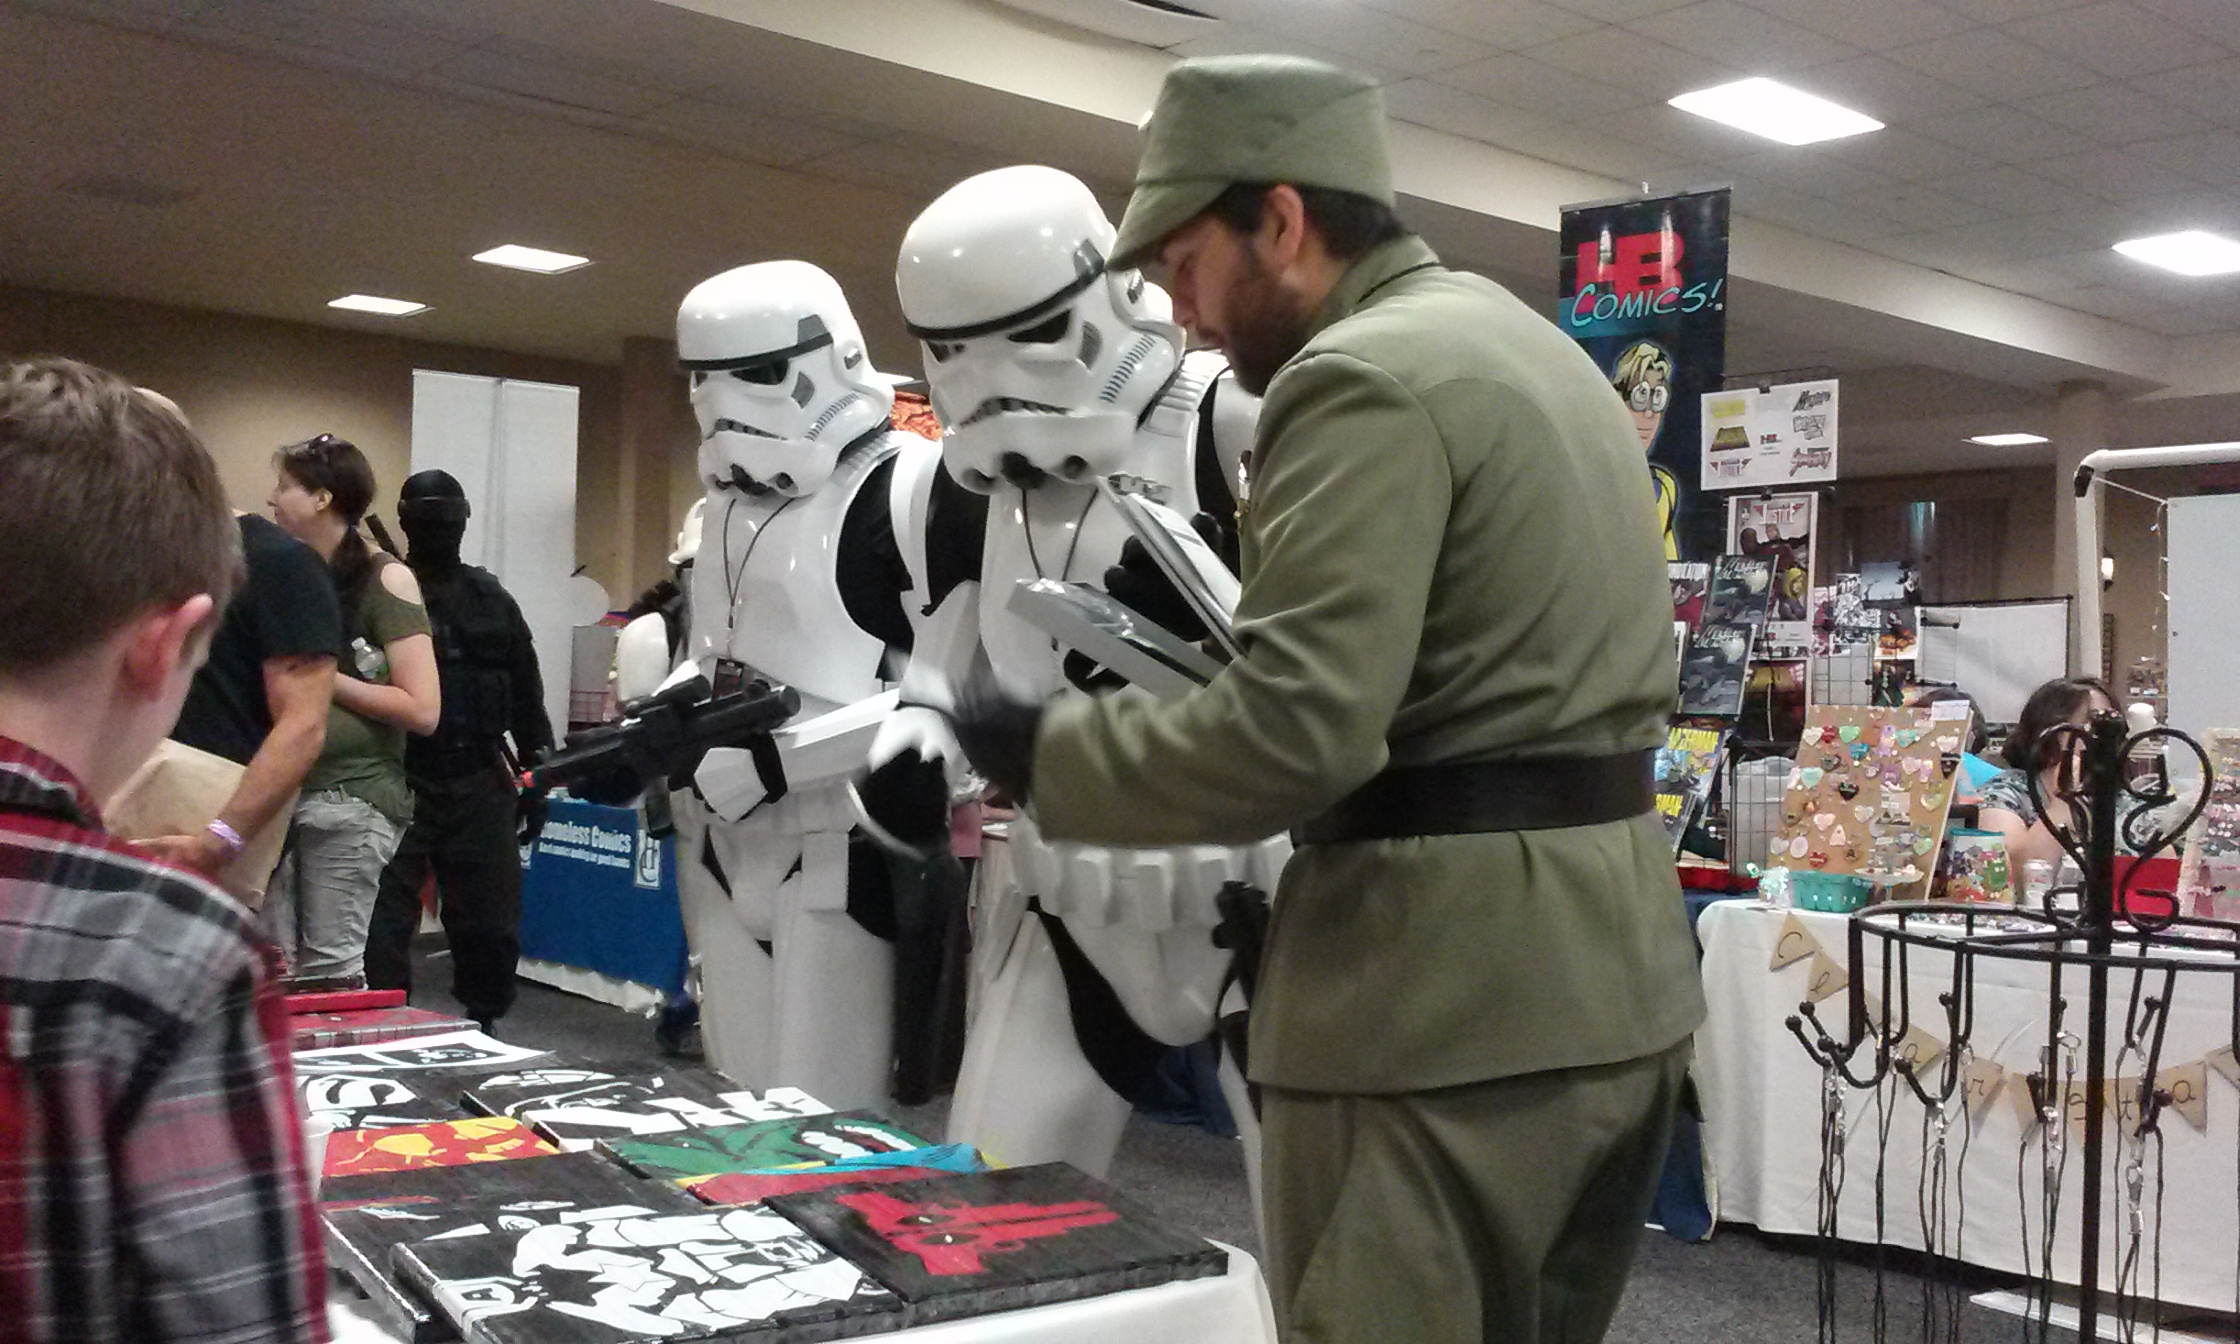 Storm Troopers examining artwork made entirely from duct tape.